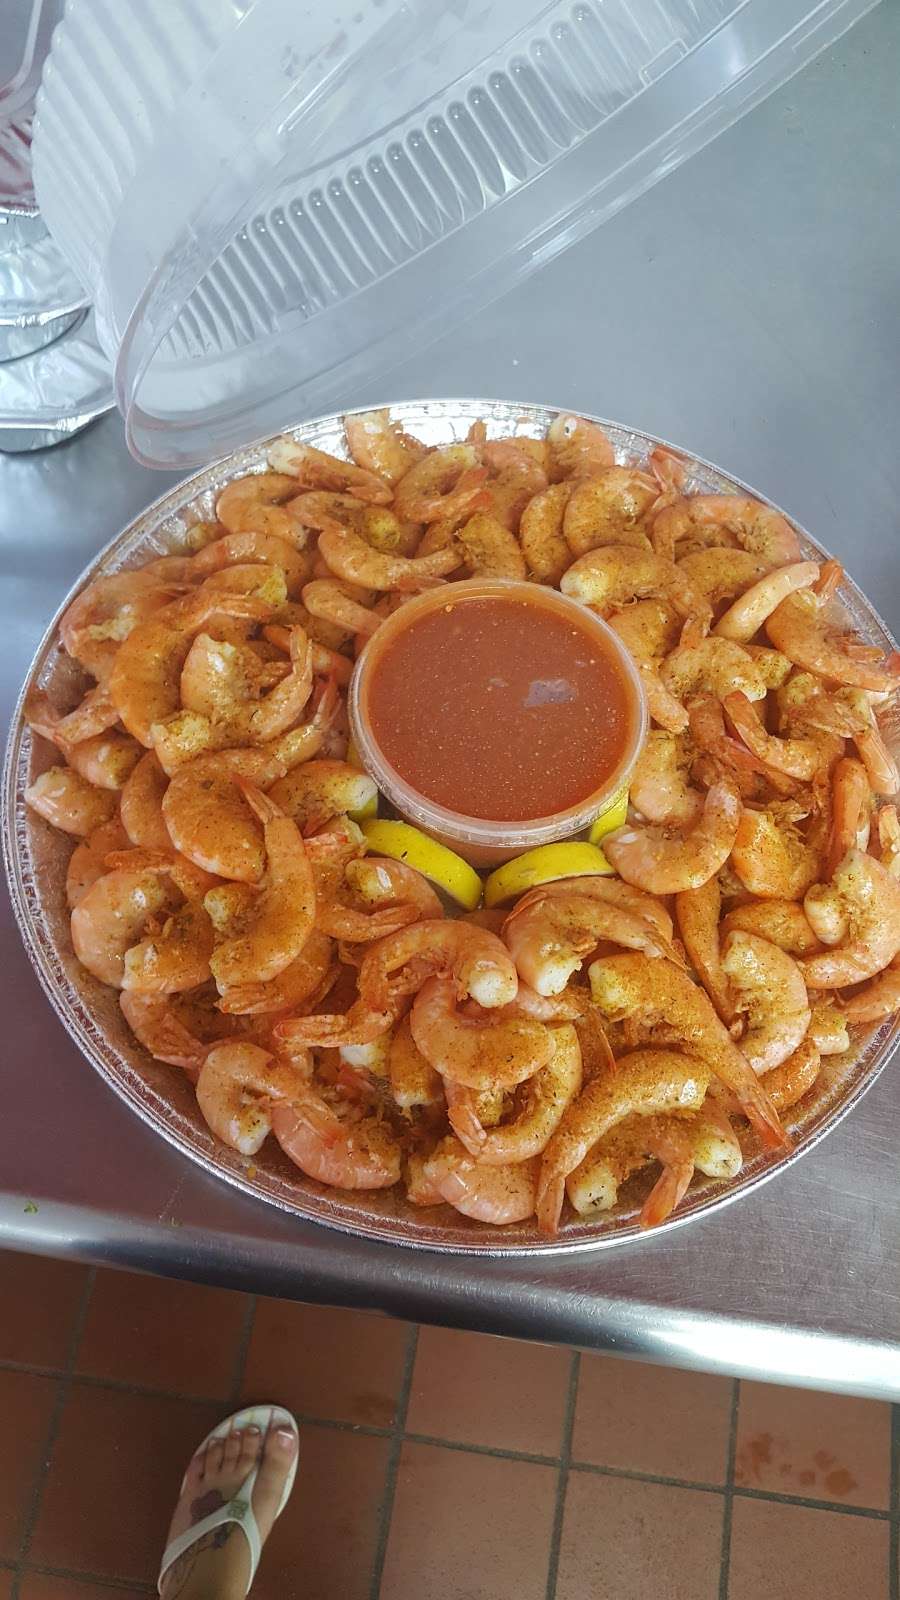 Capt Zeaks Crab House and Seafood | 192 N Dupont Hwy, New Castle, DE 19720 | Phone: (302) 322-2448